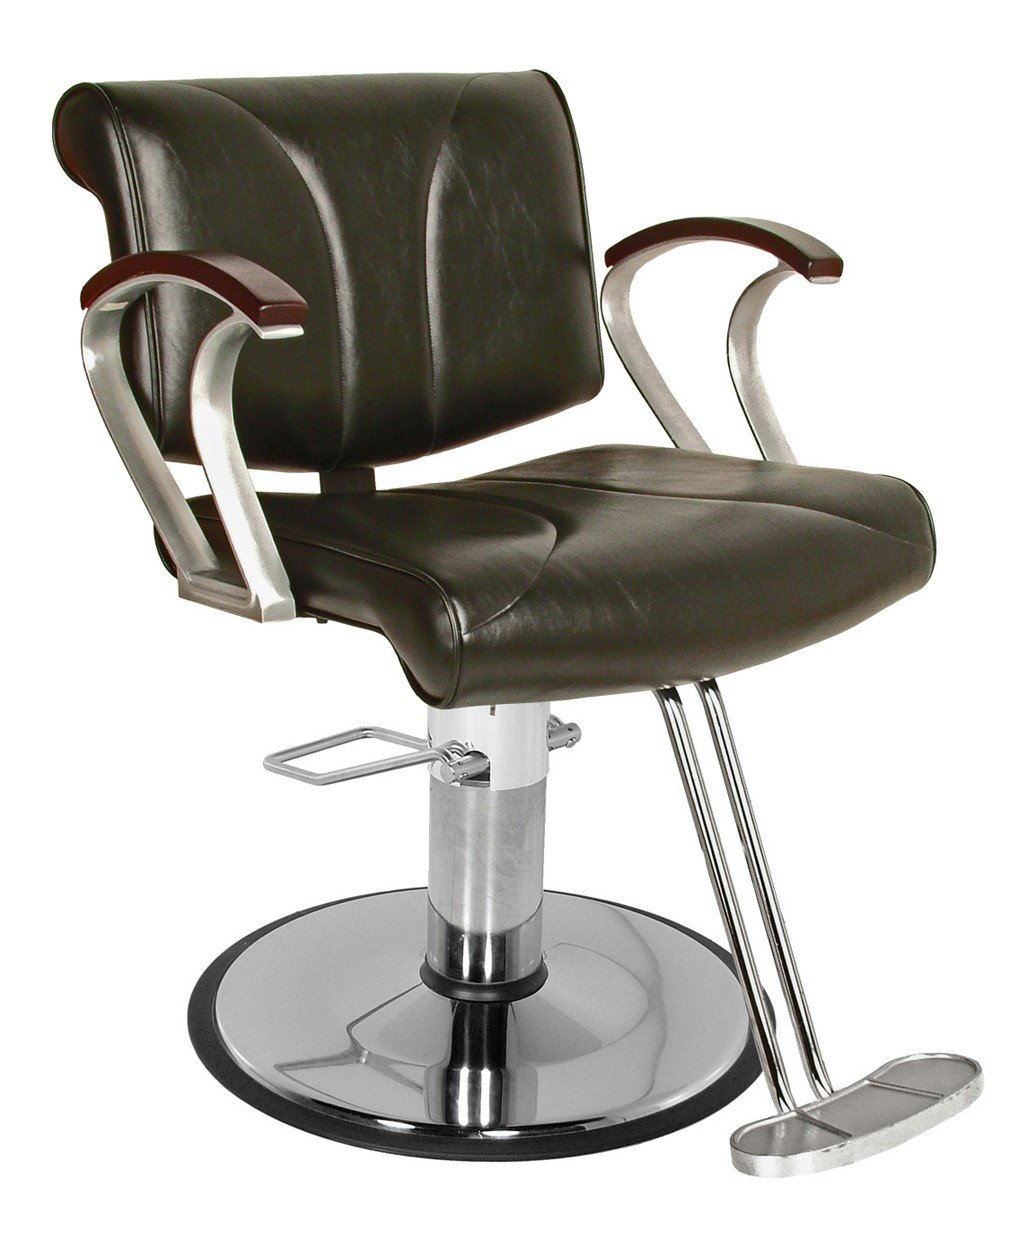 Collins 8101 Chelsea BA Styling Chair